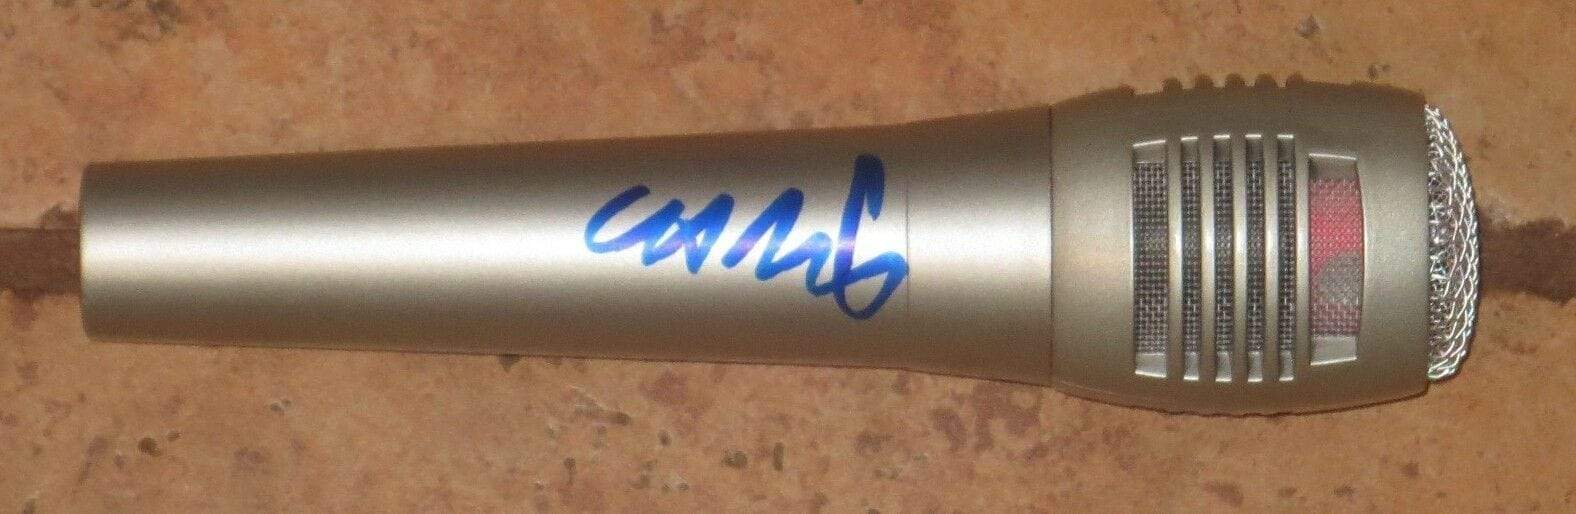 Chris Martin of Coldplay Authentic Autographed Microphone - Prime Time Signatures - Music